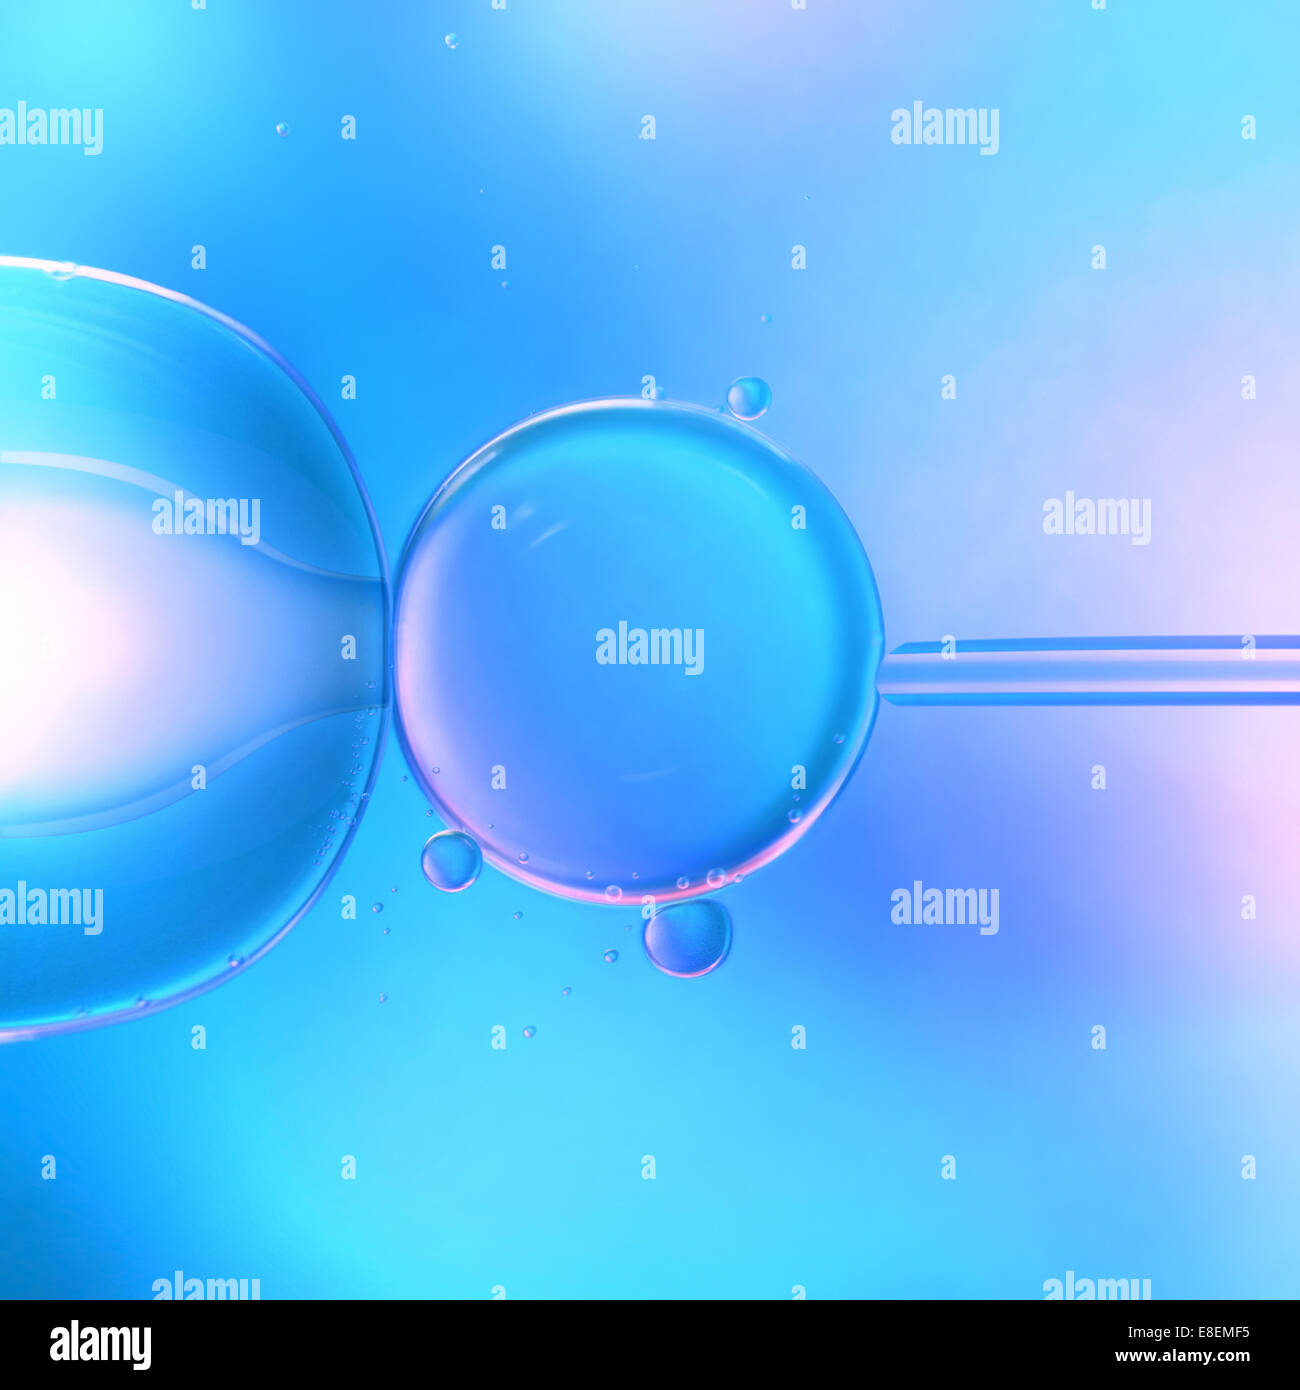 Image concept of in vitro fertilization assisted by microscope. Stock Photo